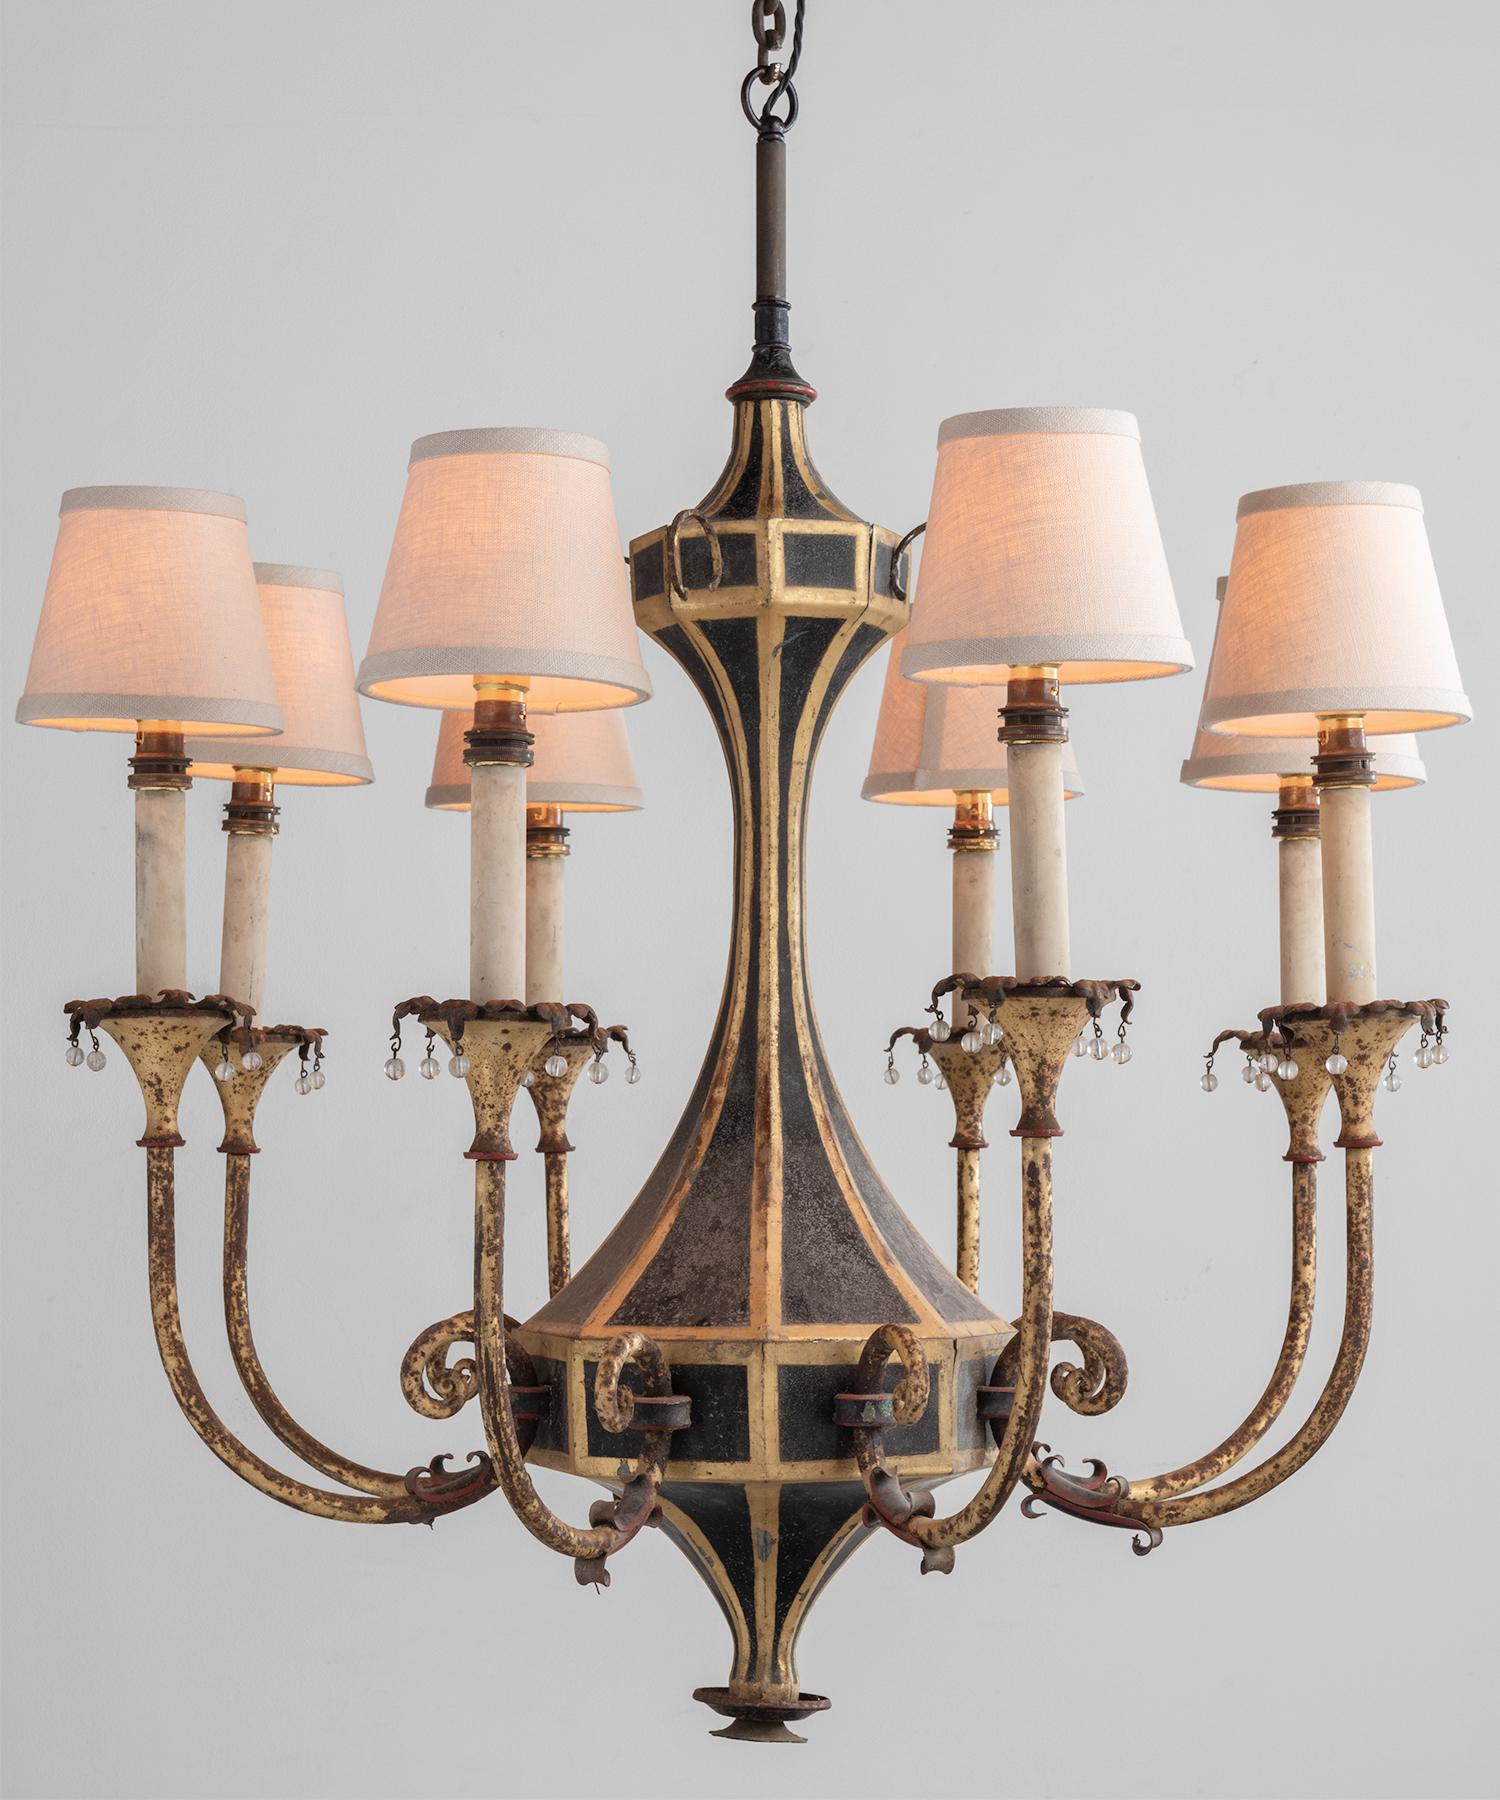 Ornate metal chandelier, France, circa 1920.

Hand-painted metal chandelier with original patina. Elegant form with new linen shades.

Measures: 30